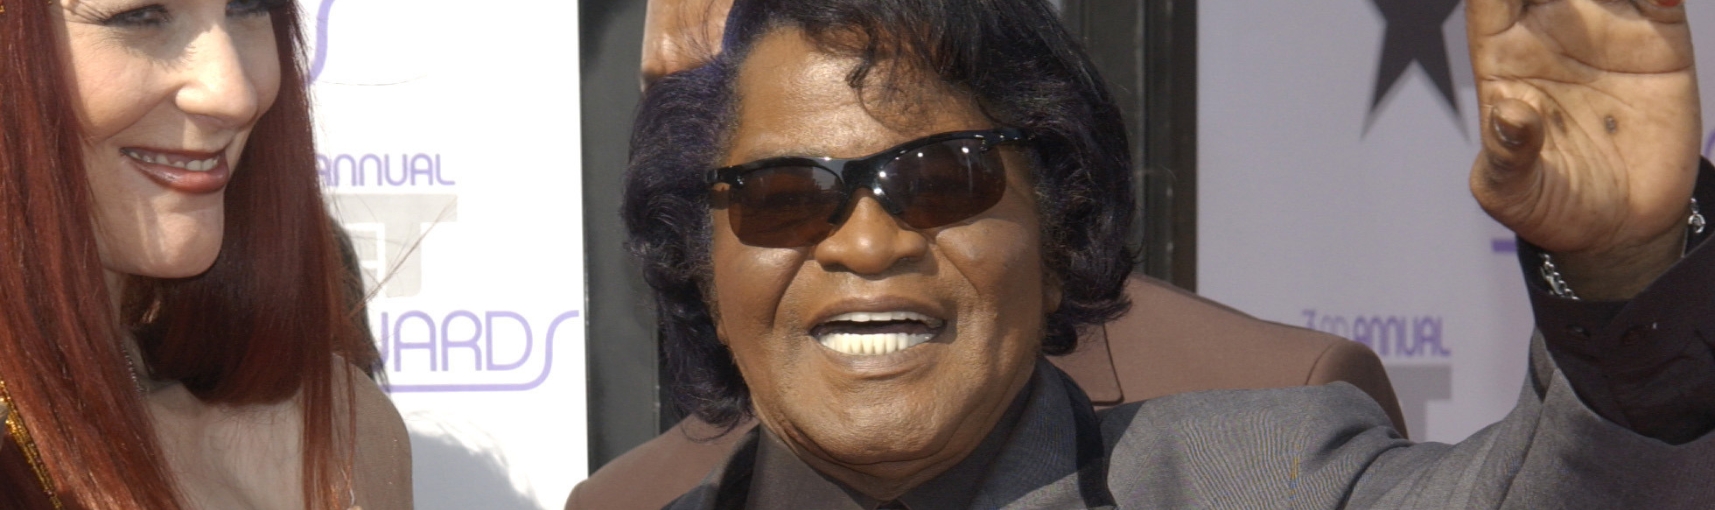 A woman with red hair stands next to an older Black man with black hair and sunglasses